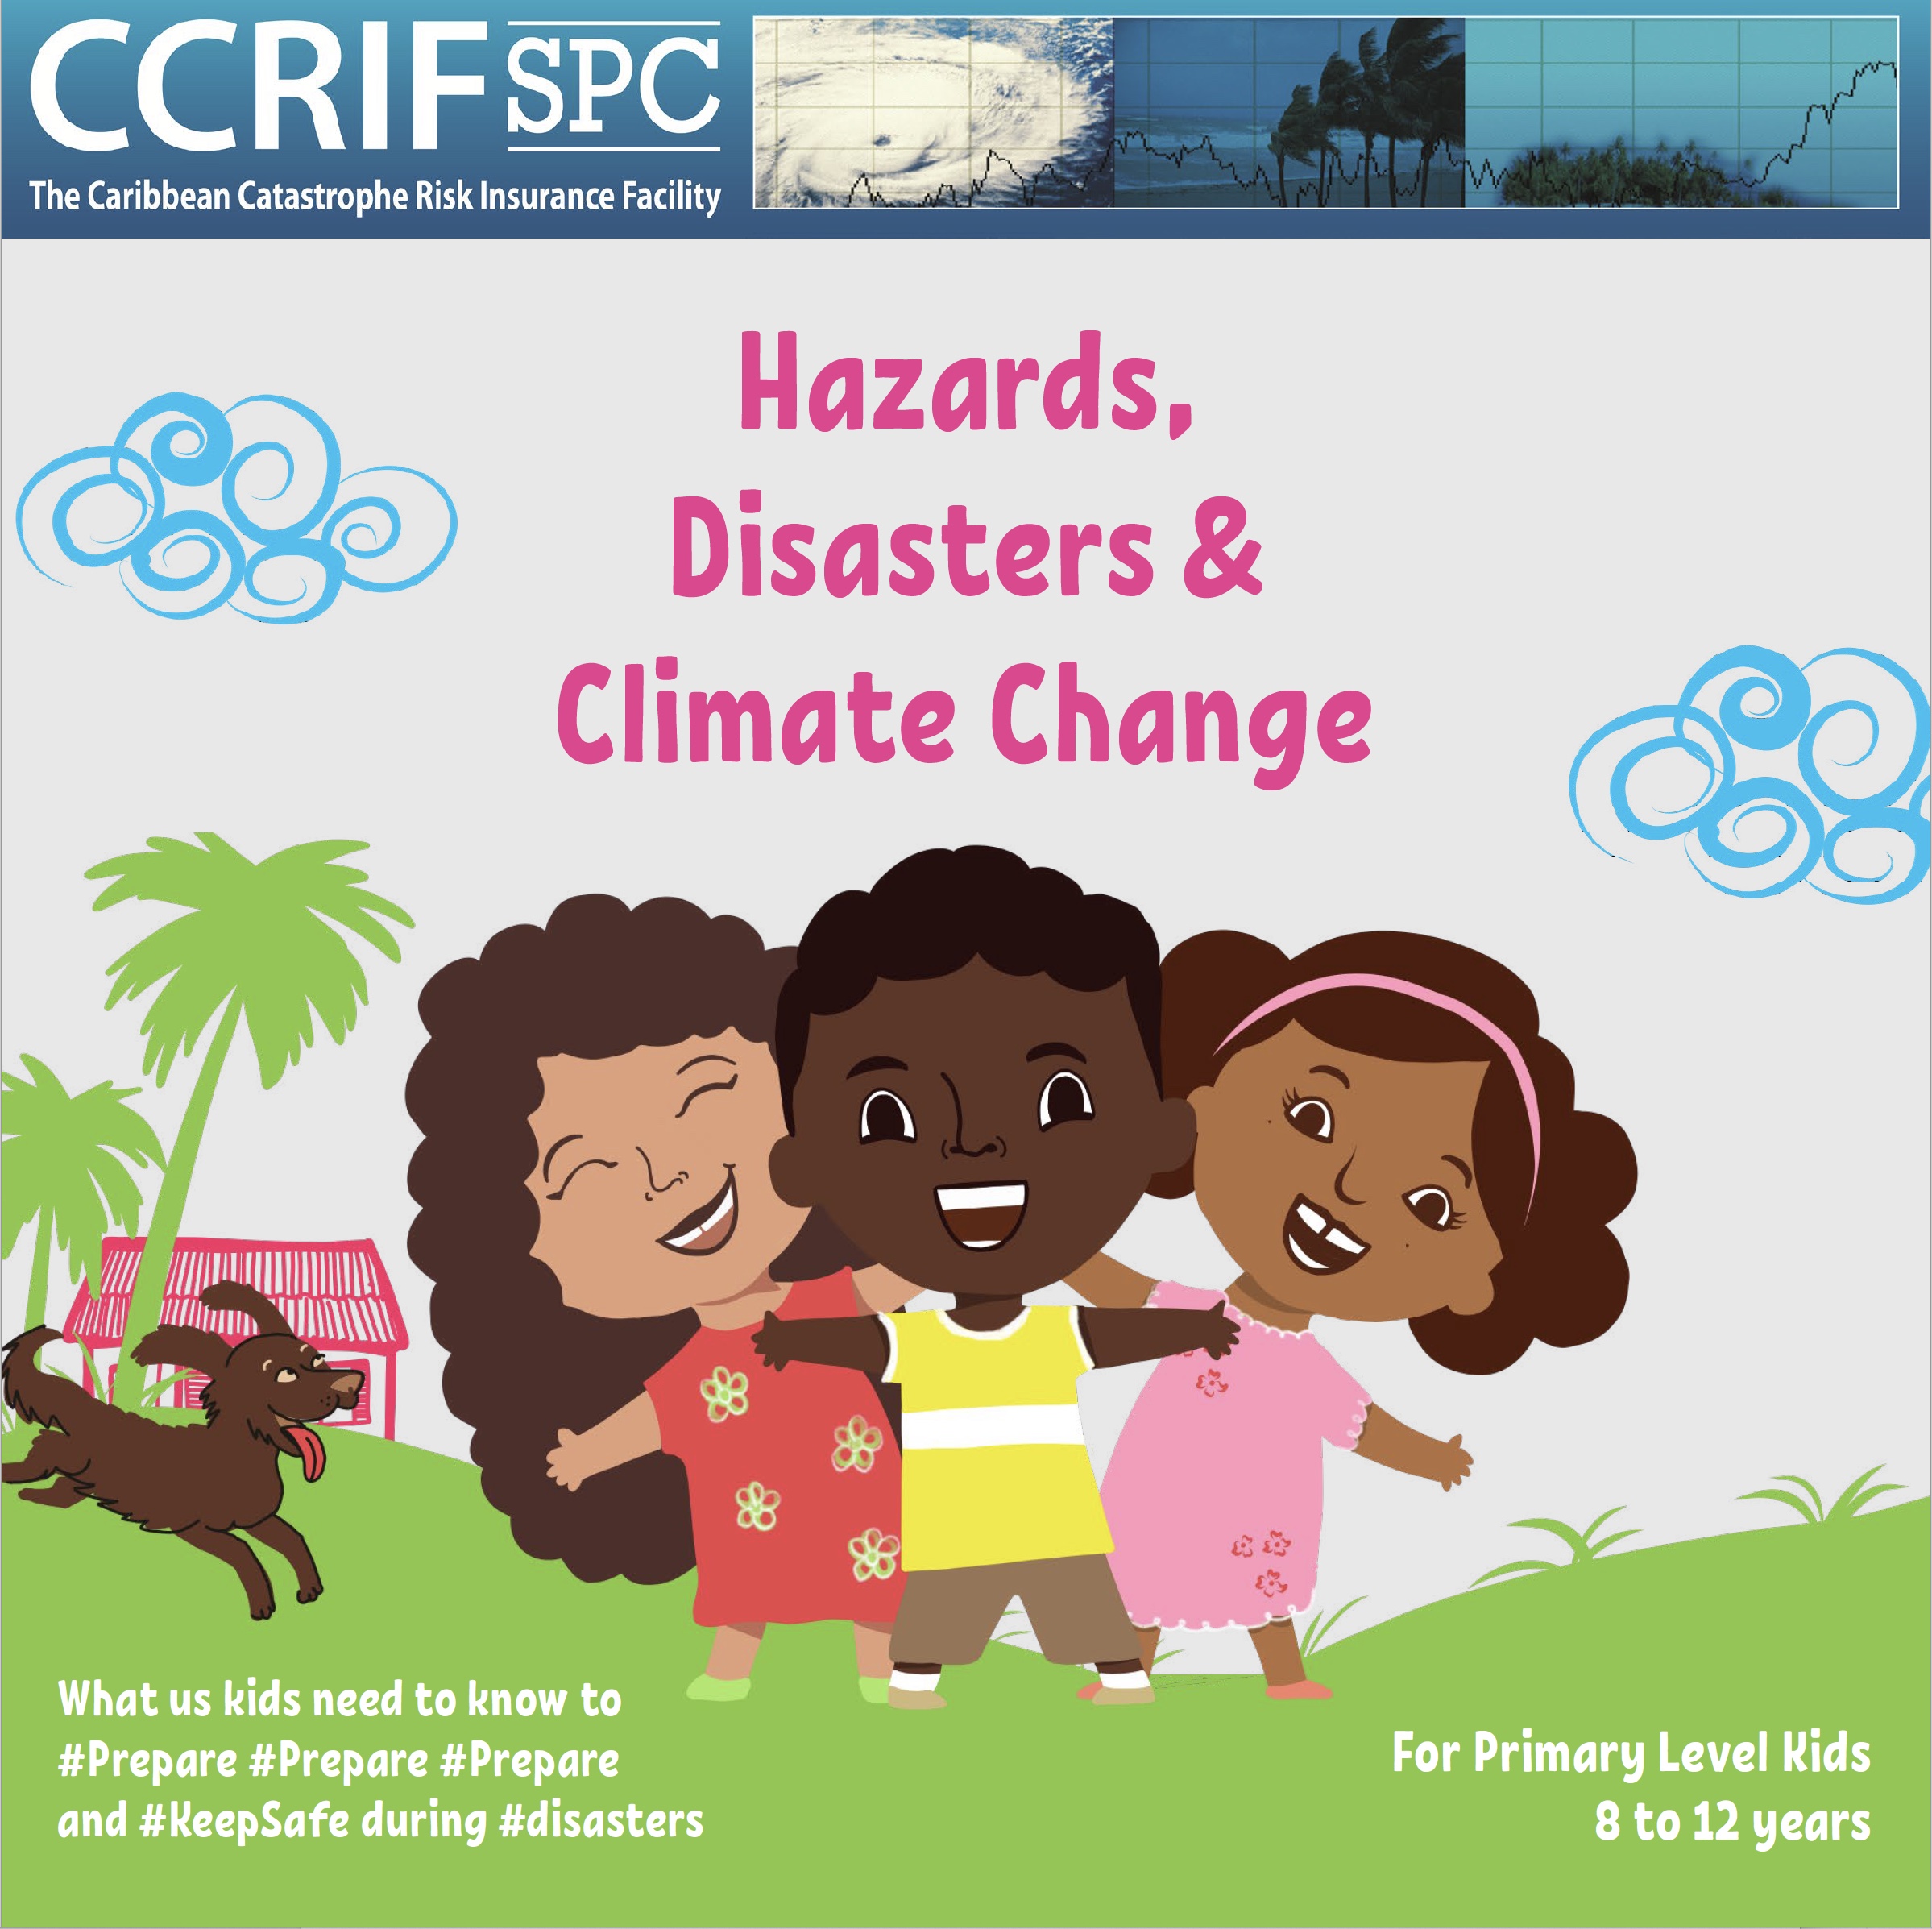 Hazards, Disasters & Climate Change